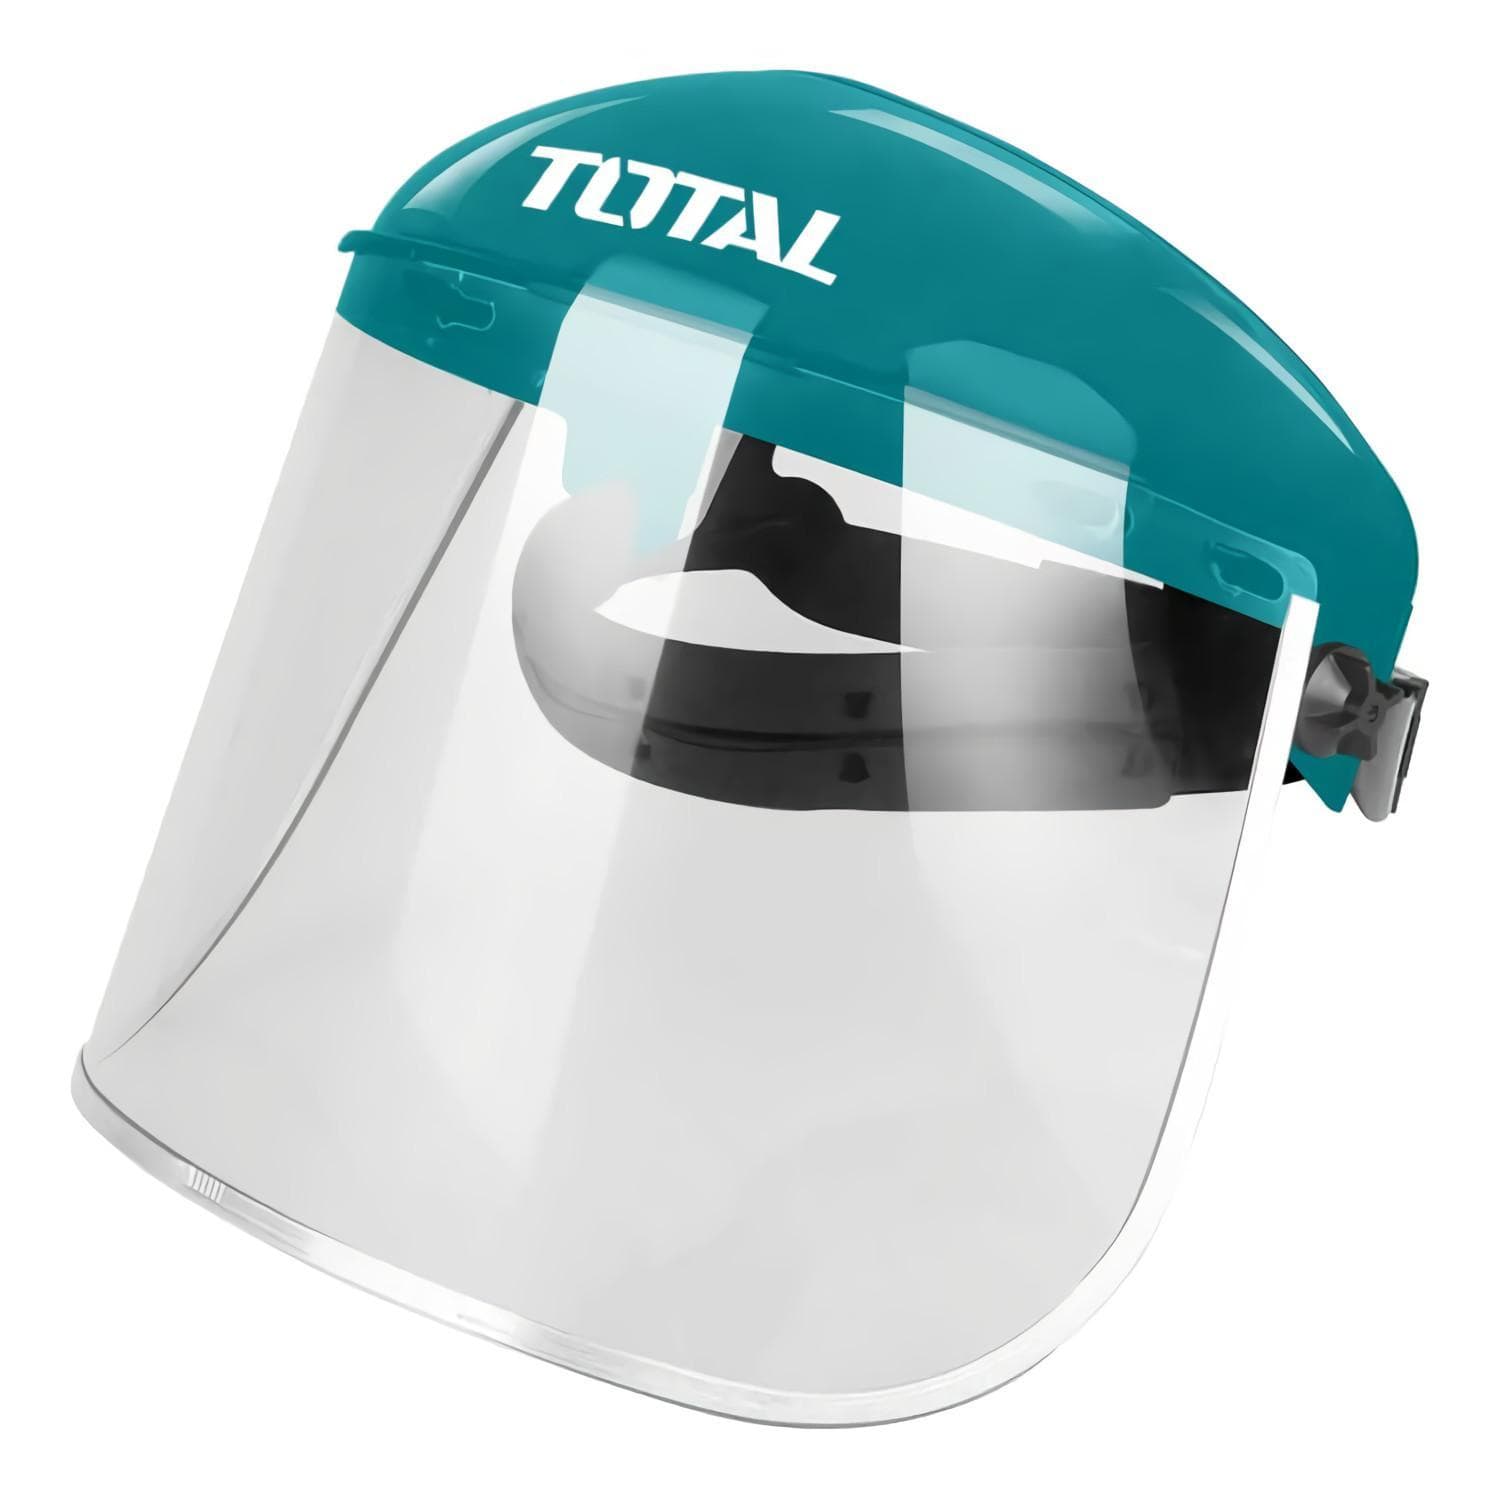 Total Face Shield - TSP610 | Supply Master | Accra, Ghana Tools Building Steel Engineering Hardware tool